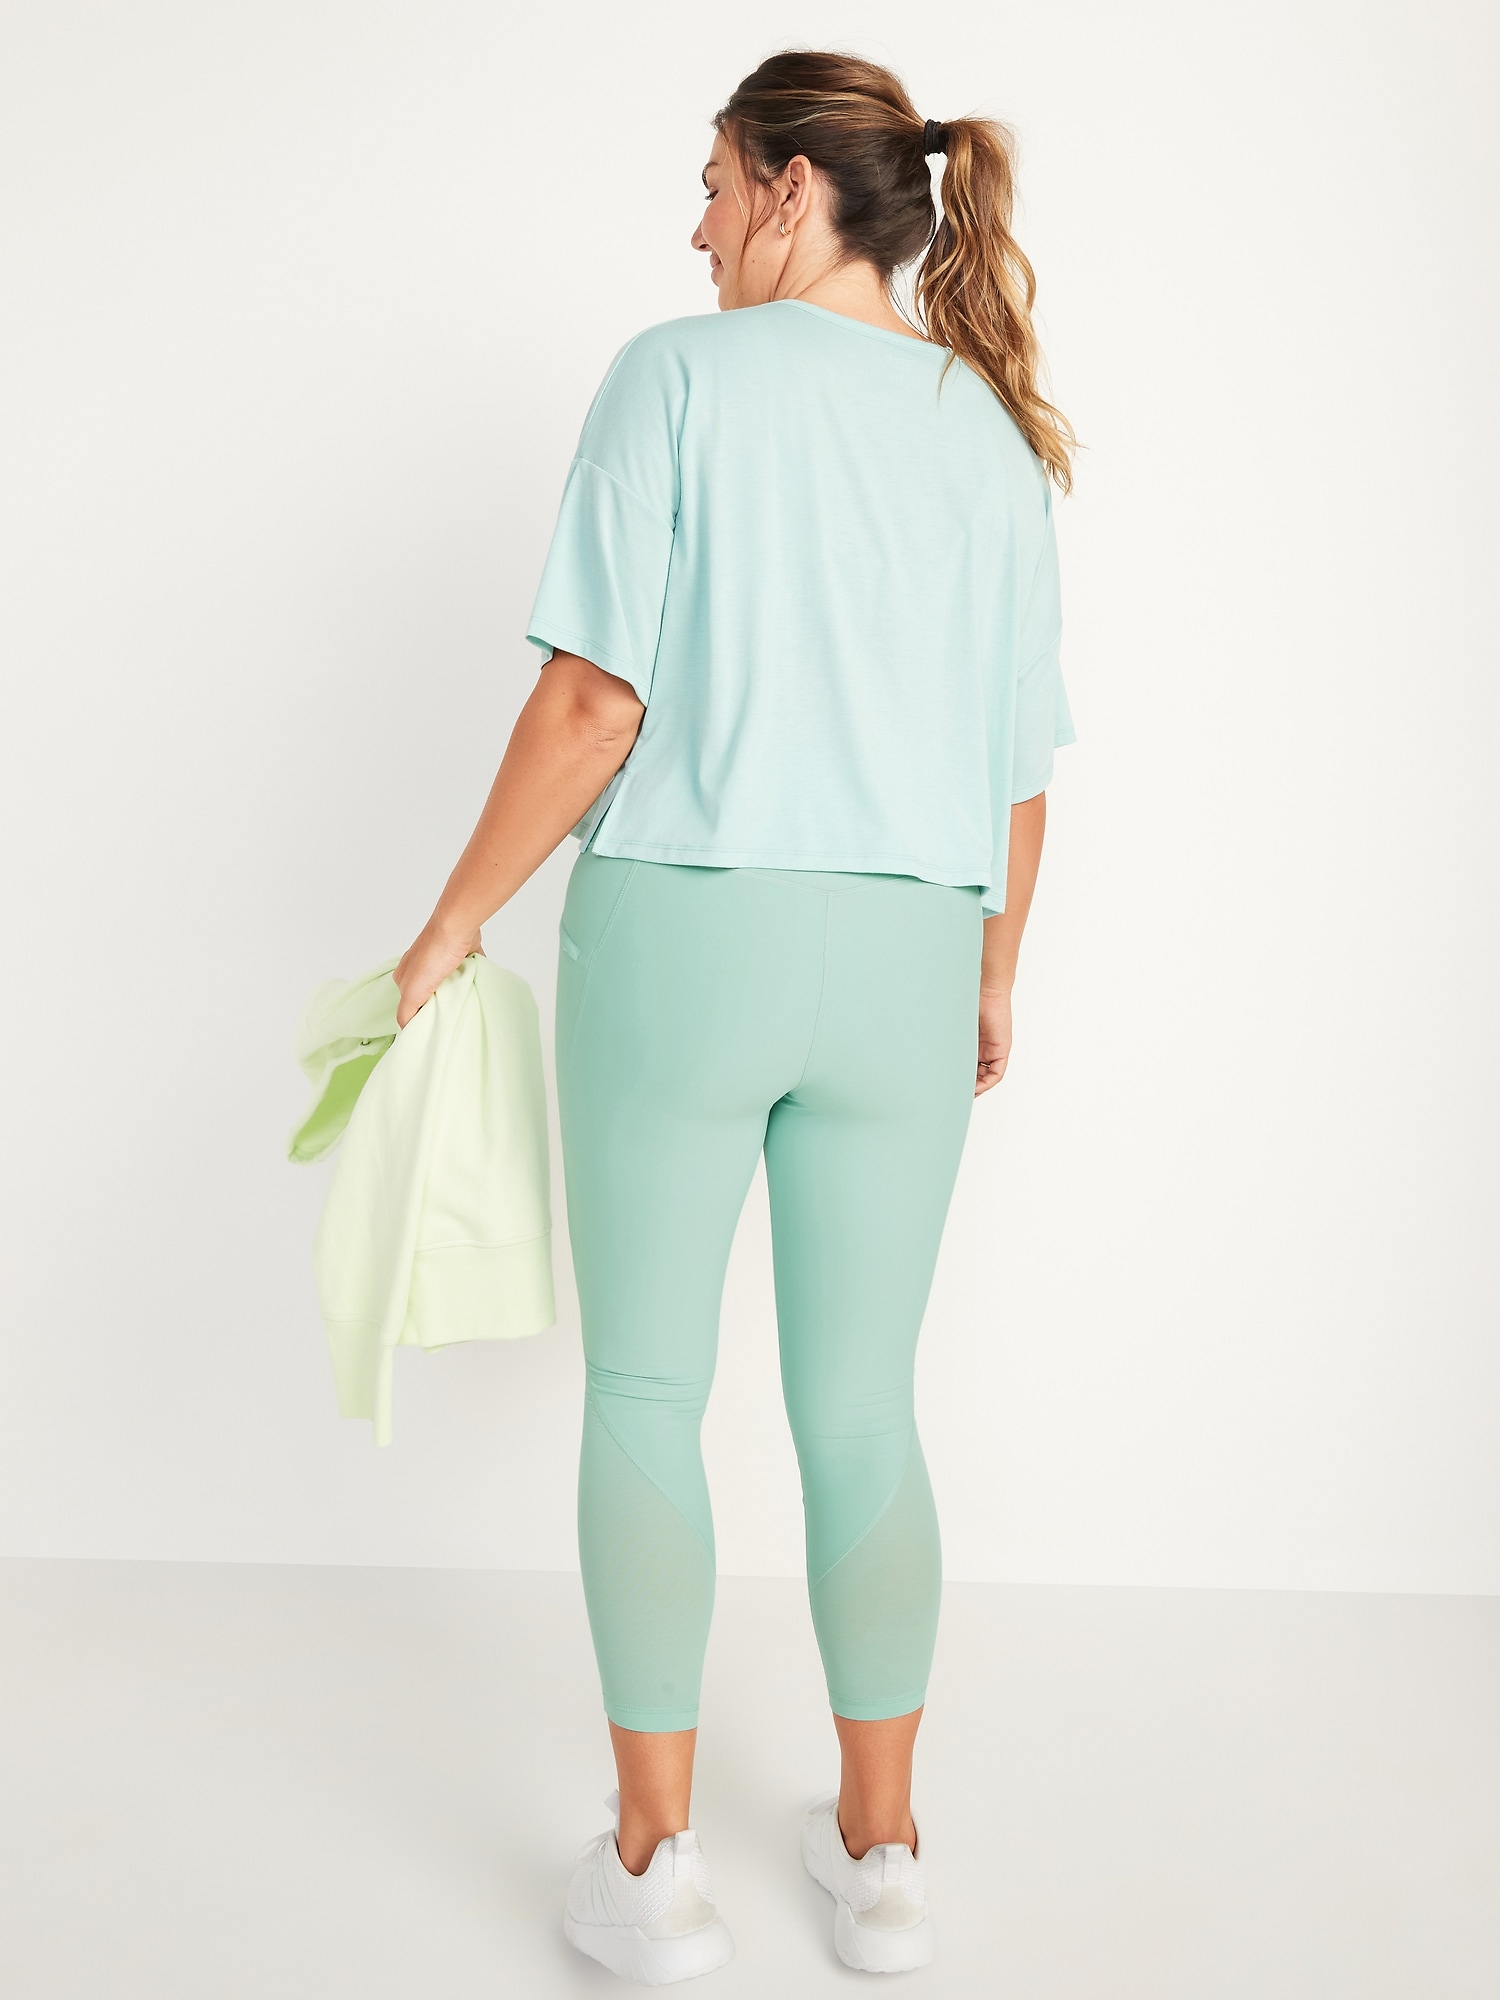 Old Navy Old Navy High-Waisted PowerSoft 7/8-Length Side-Pocket Leggings  For Women 39.99